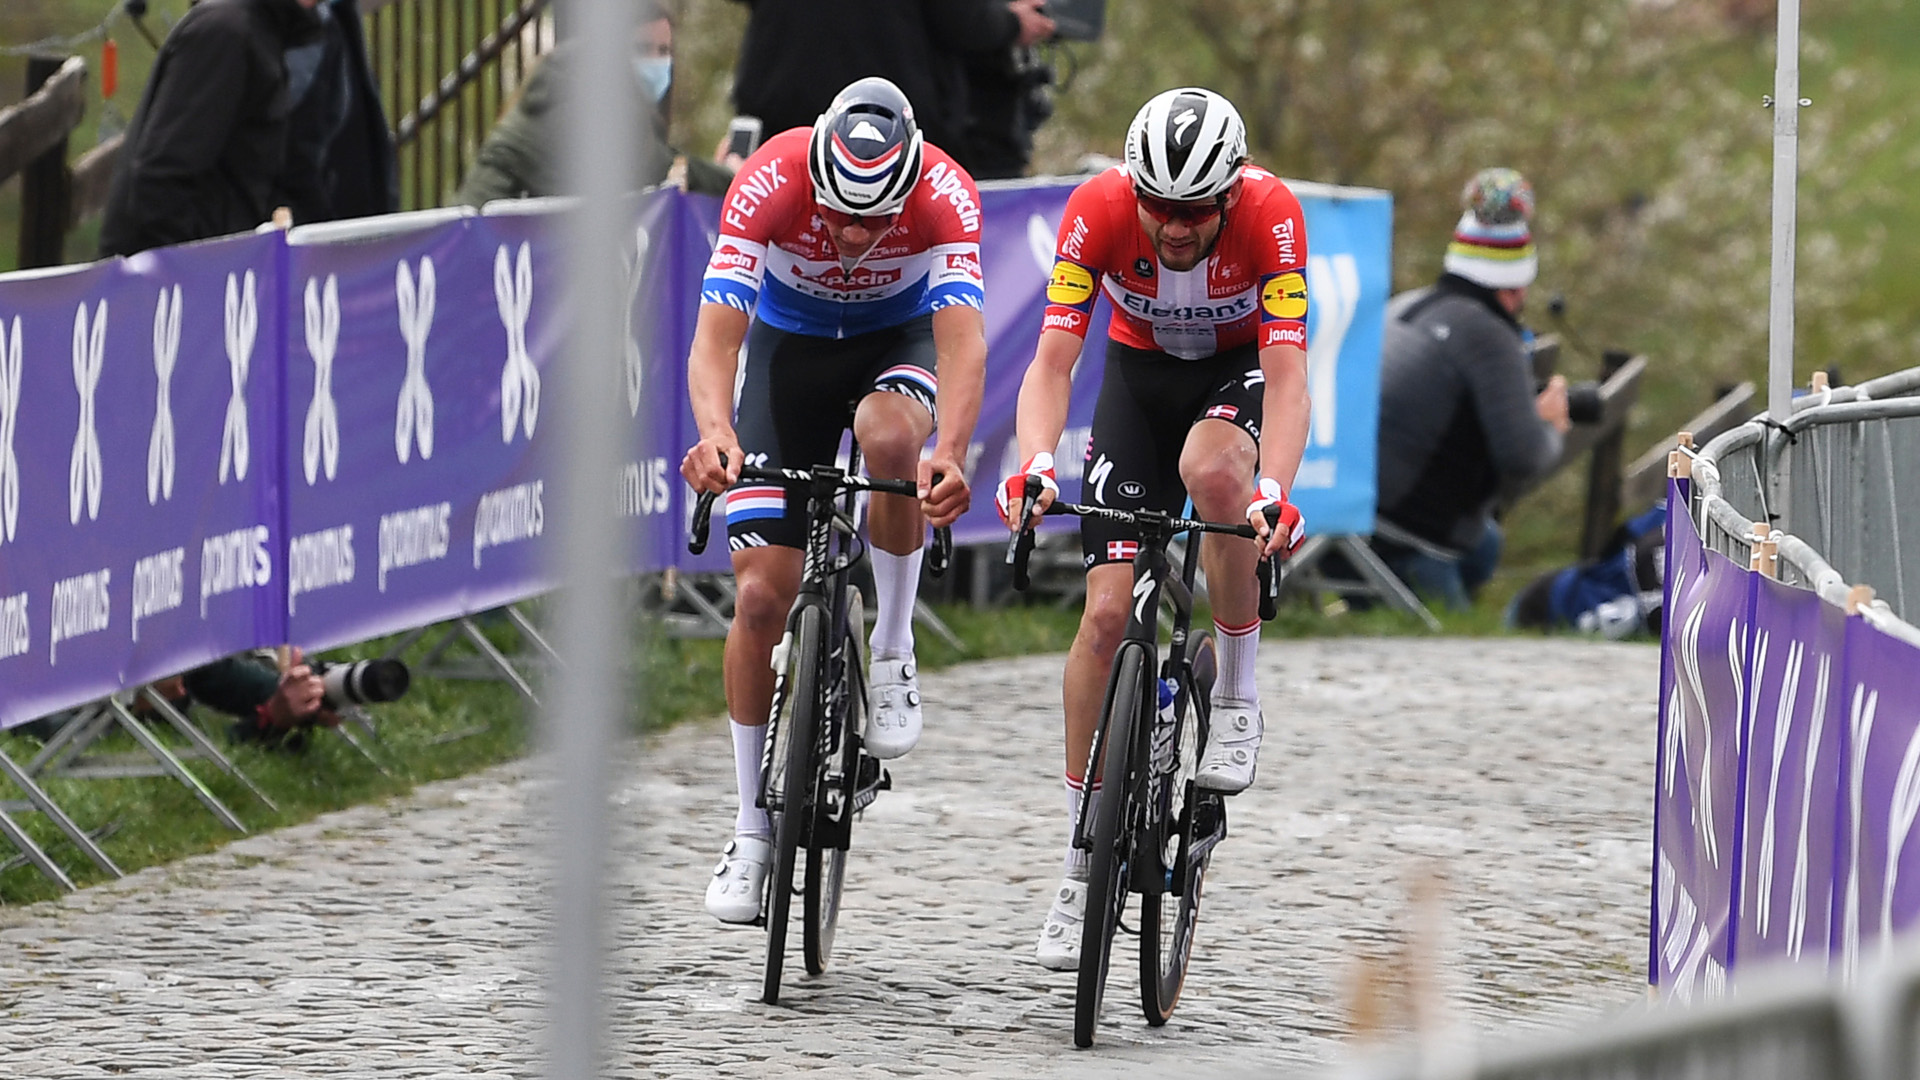 Tour of Flanders live stream 2022 how to watch UCI cycling online and on TV from anywhere TechRadar